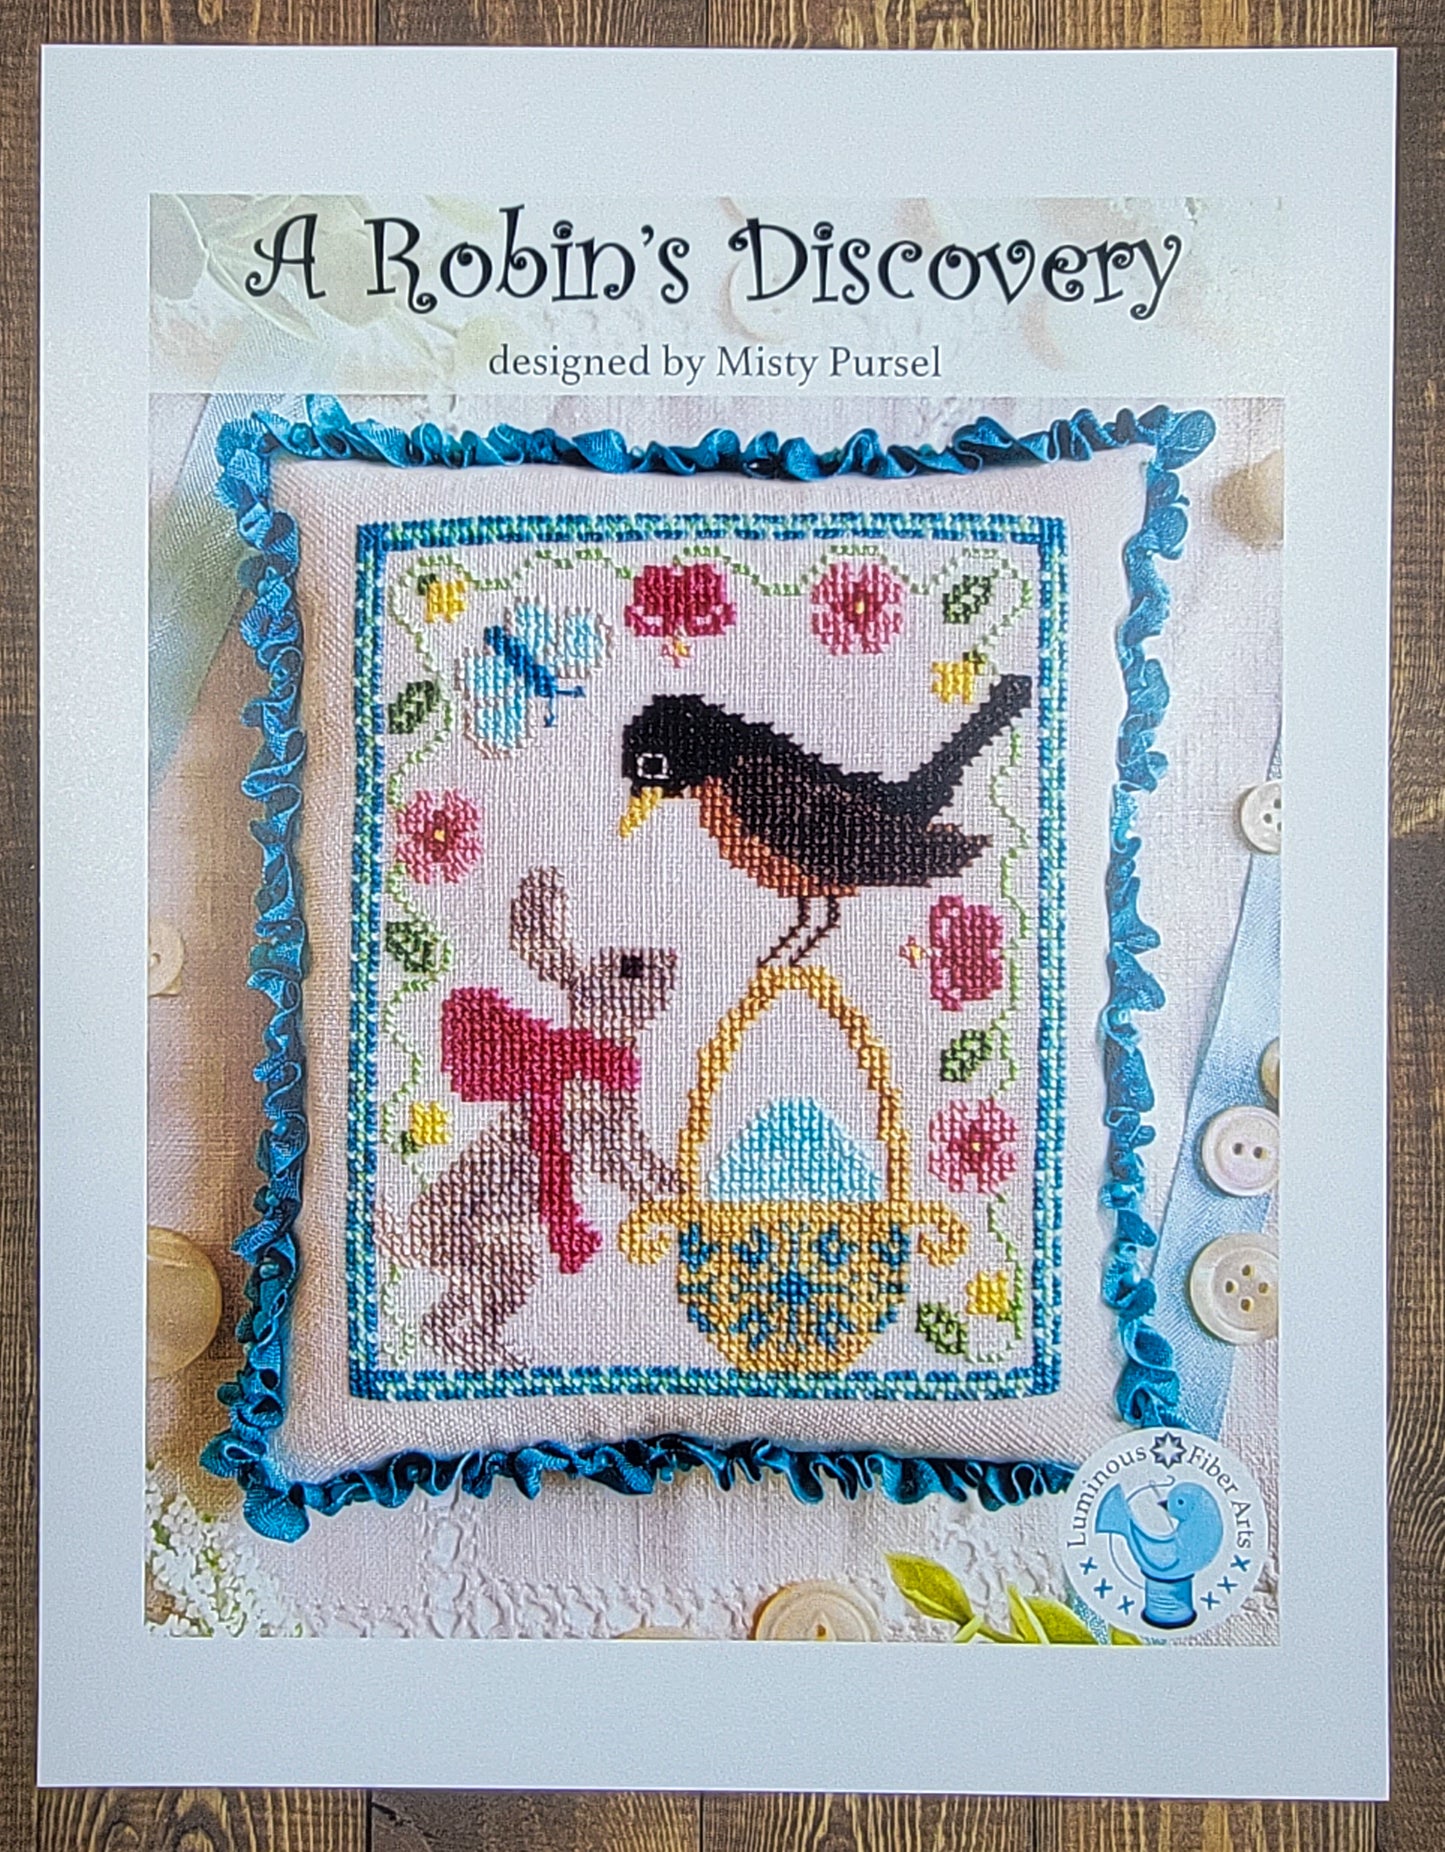 A Robin's Discovery